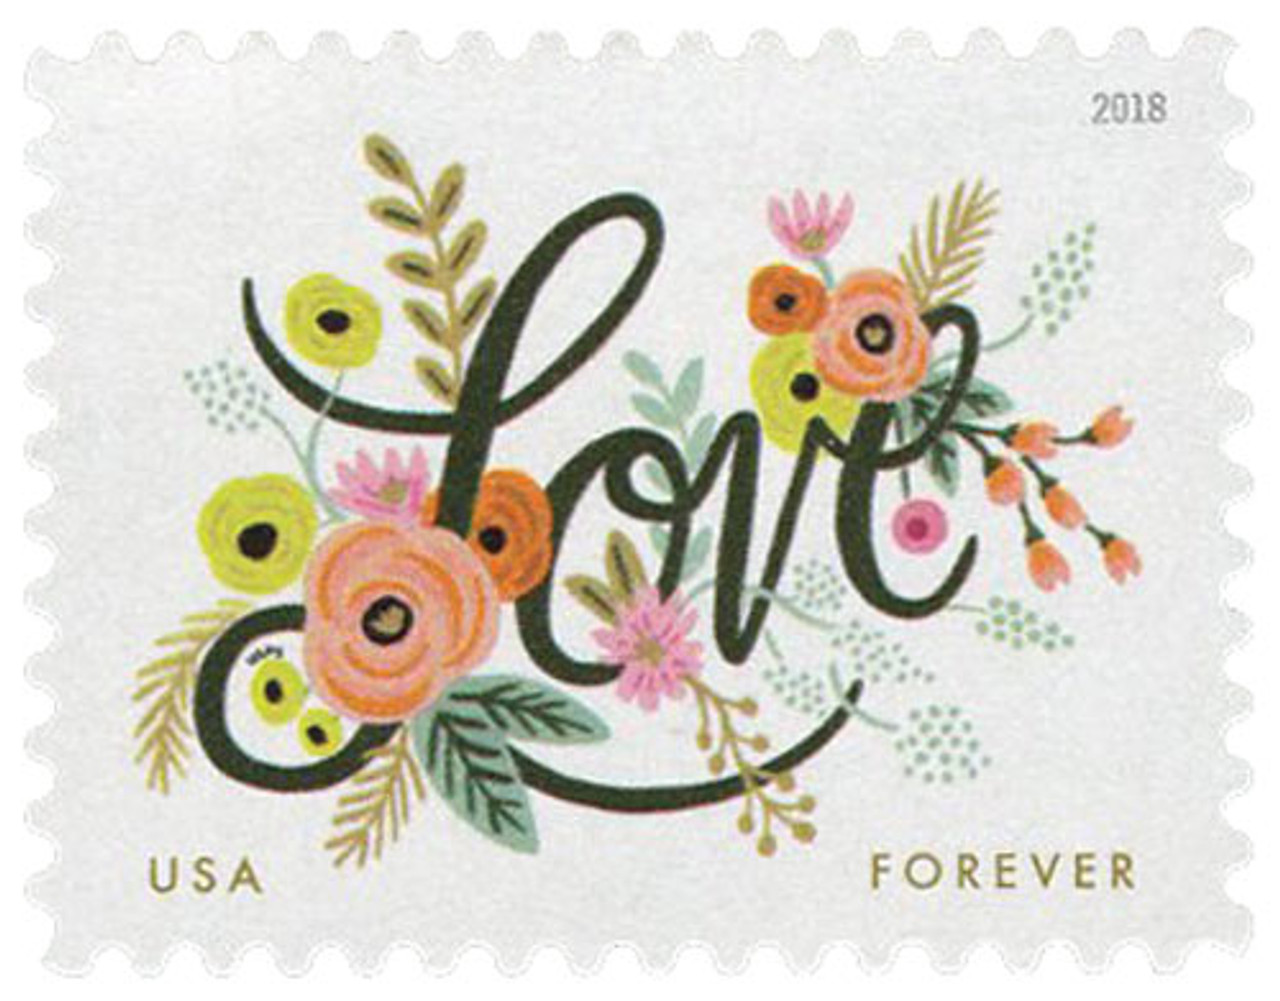 5255 - 2018 First-Class Forever Stamp - Love Flourishes - Mystic Stamp  Company